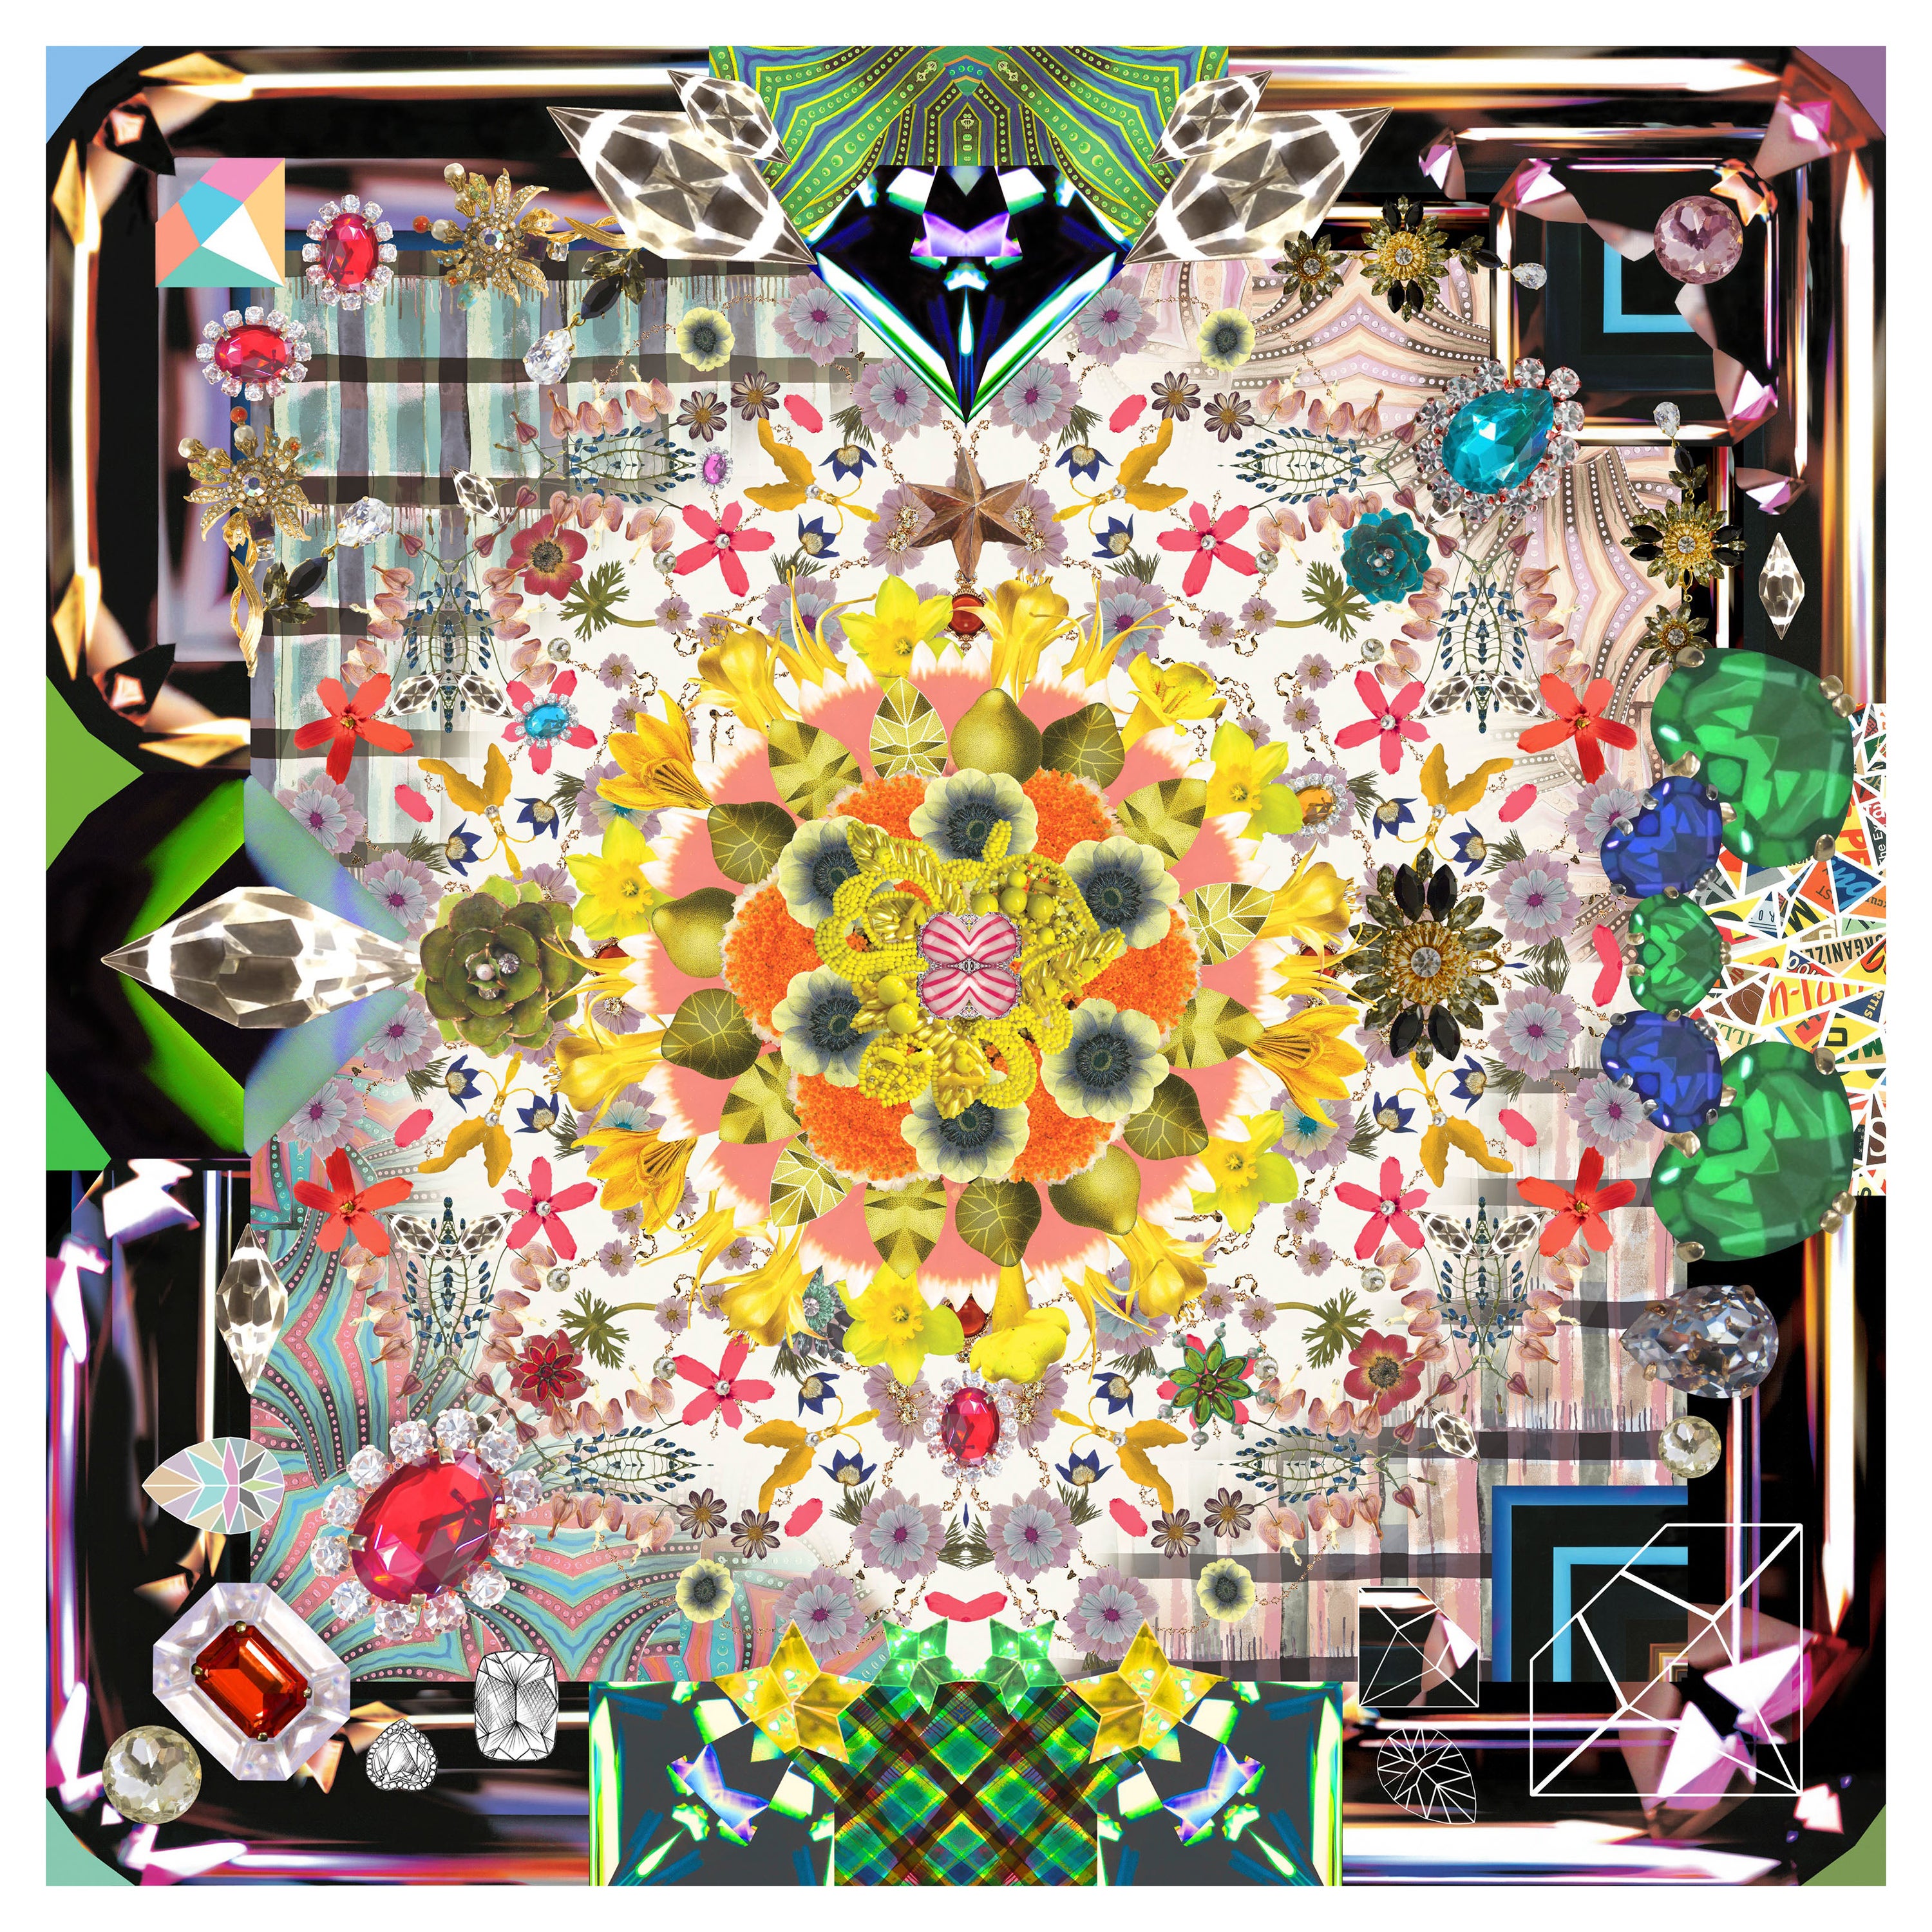 Moooi Large Jewels Garden Rug in Soft Yarn Polyamide by Christian Lacroix Maison